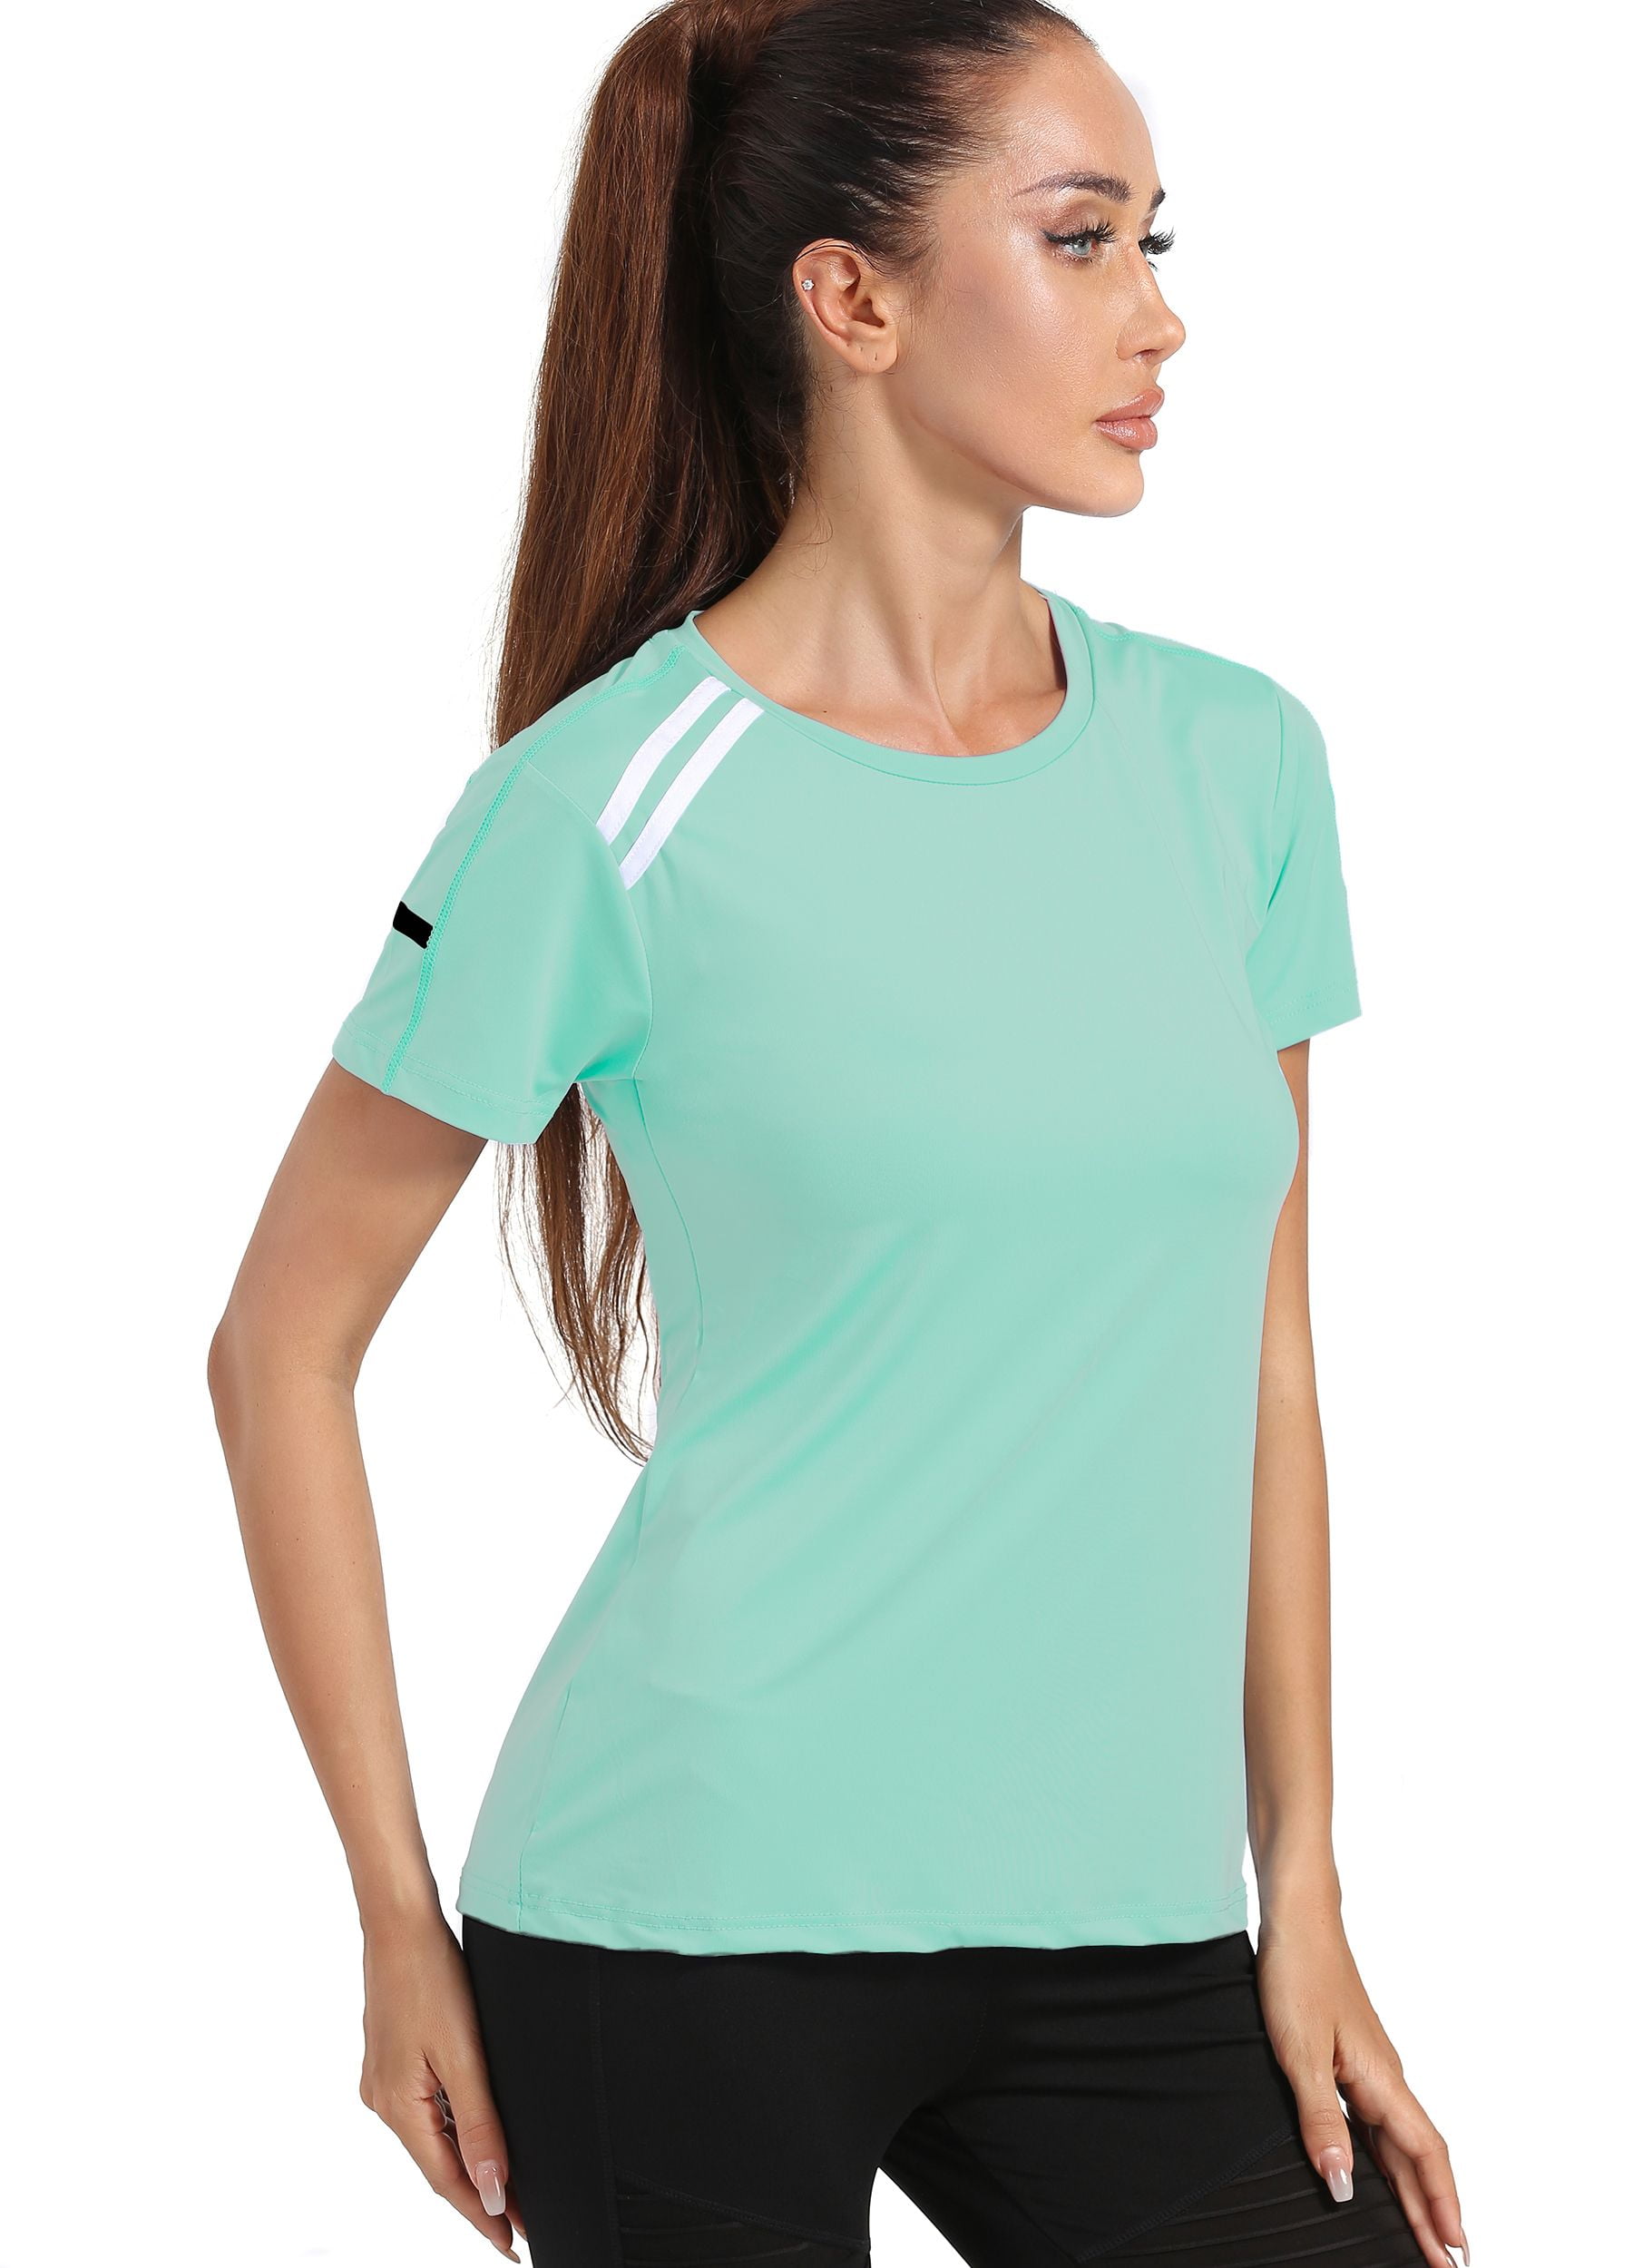 4POSE Women's Short Sleeve Active T Shirt Quick Dry Sports Yoga